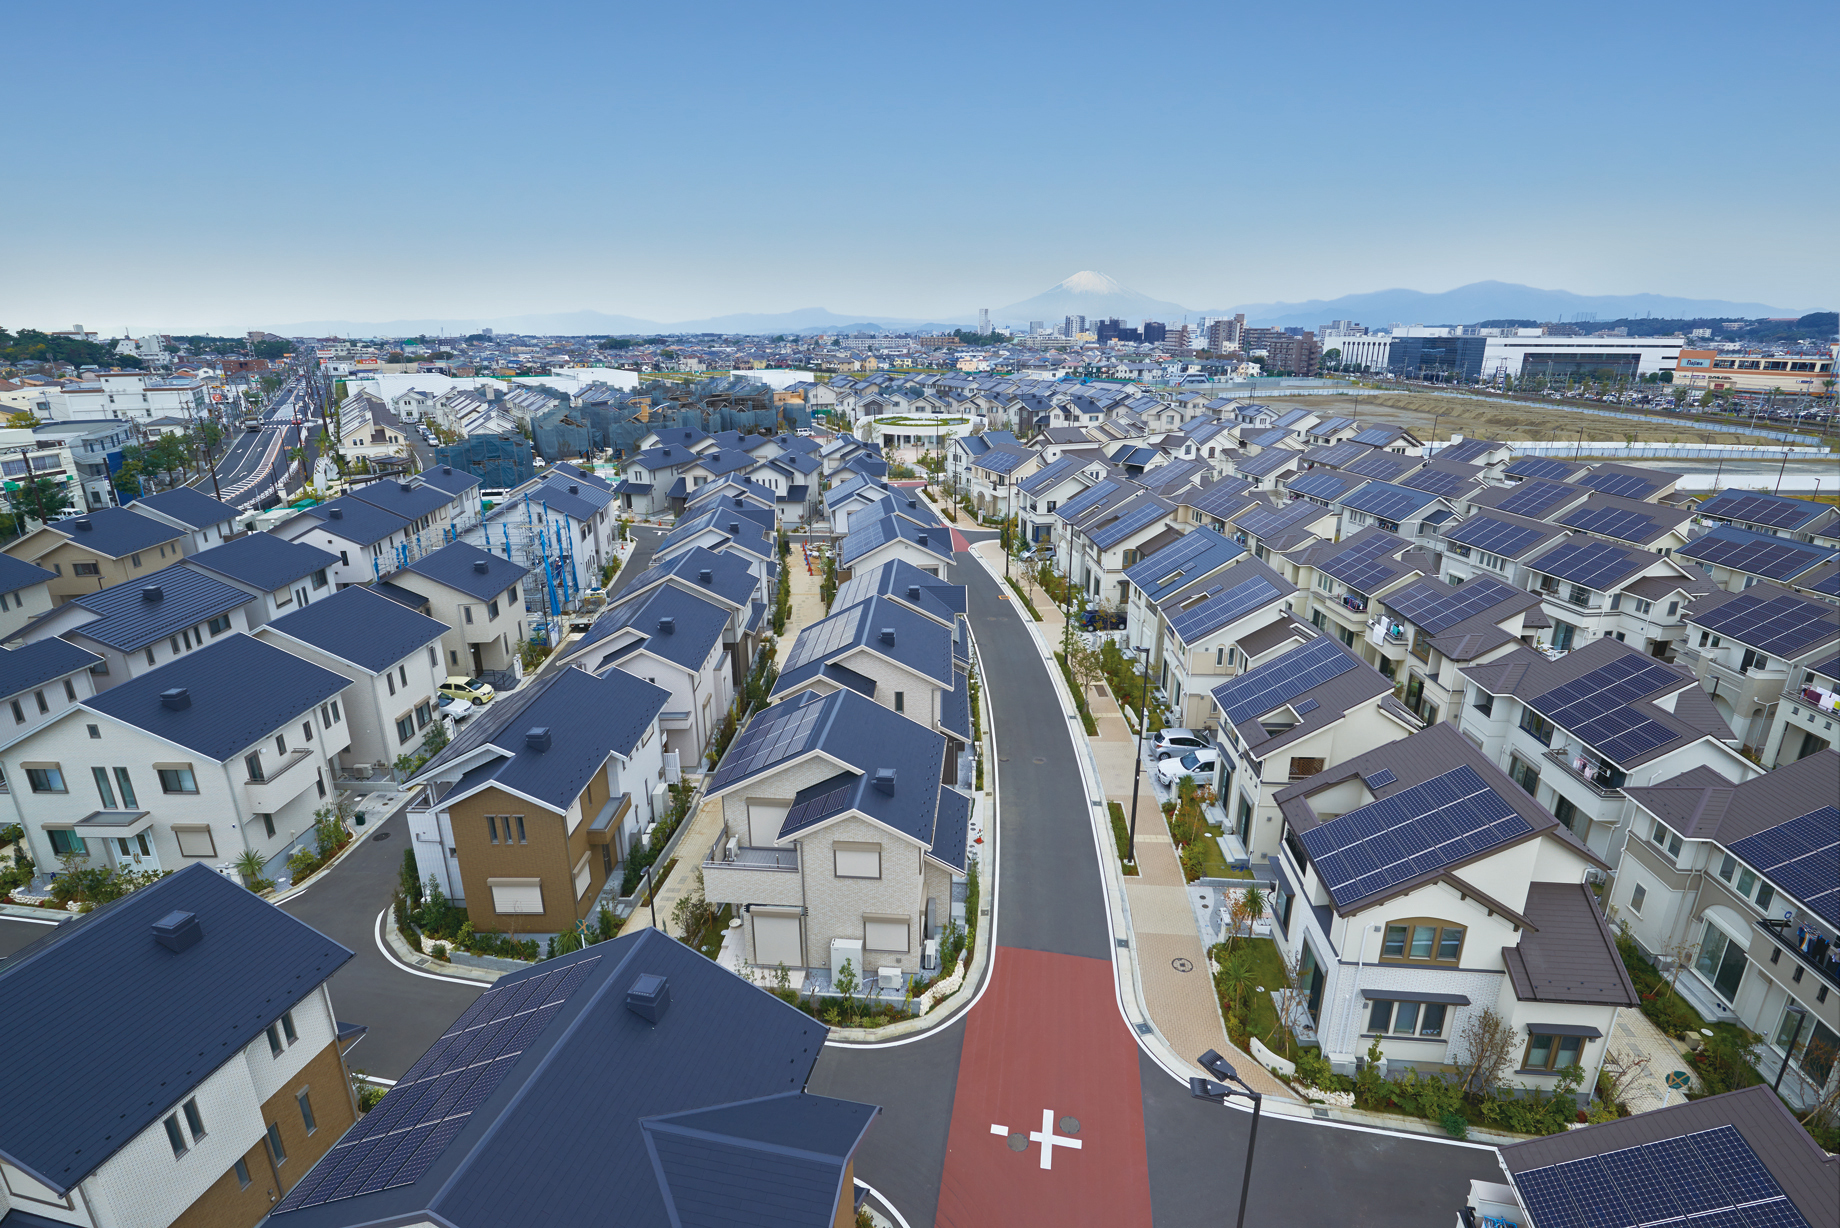 Fujisawa Sustainable Smart Town: planning for the next 100 years